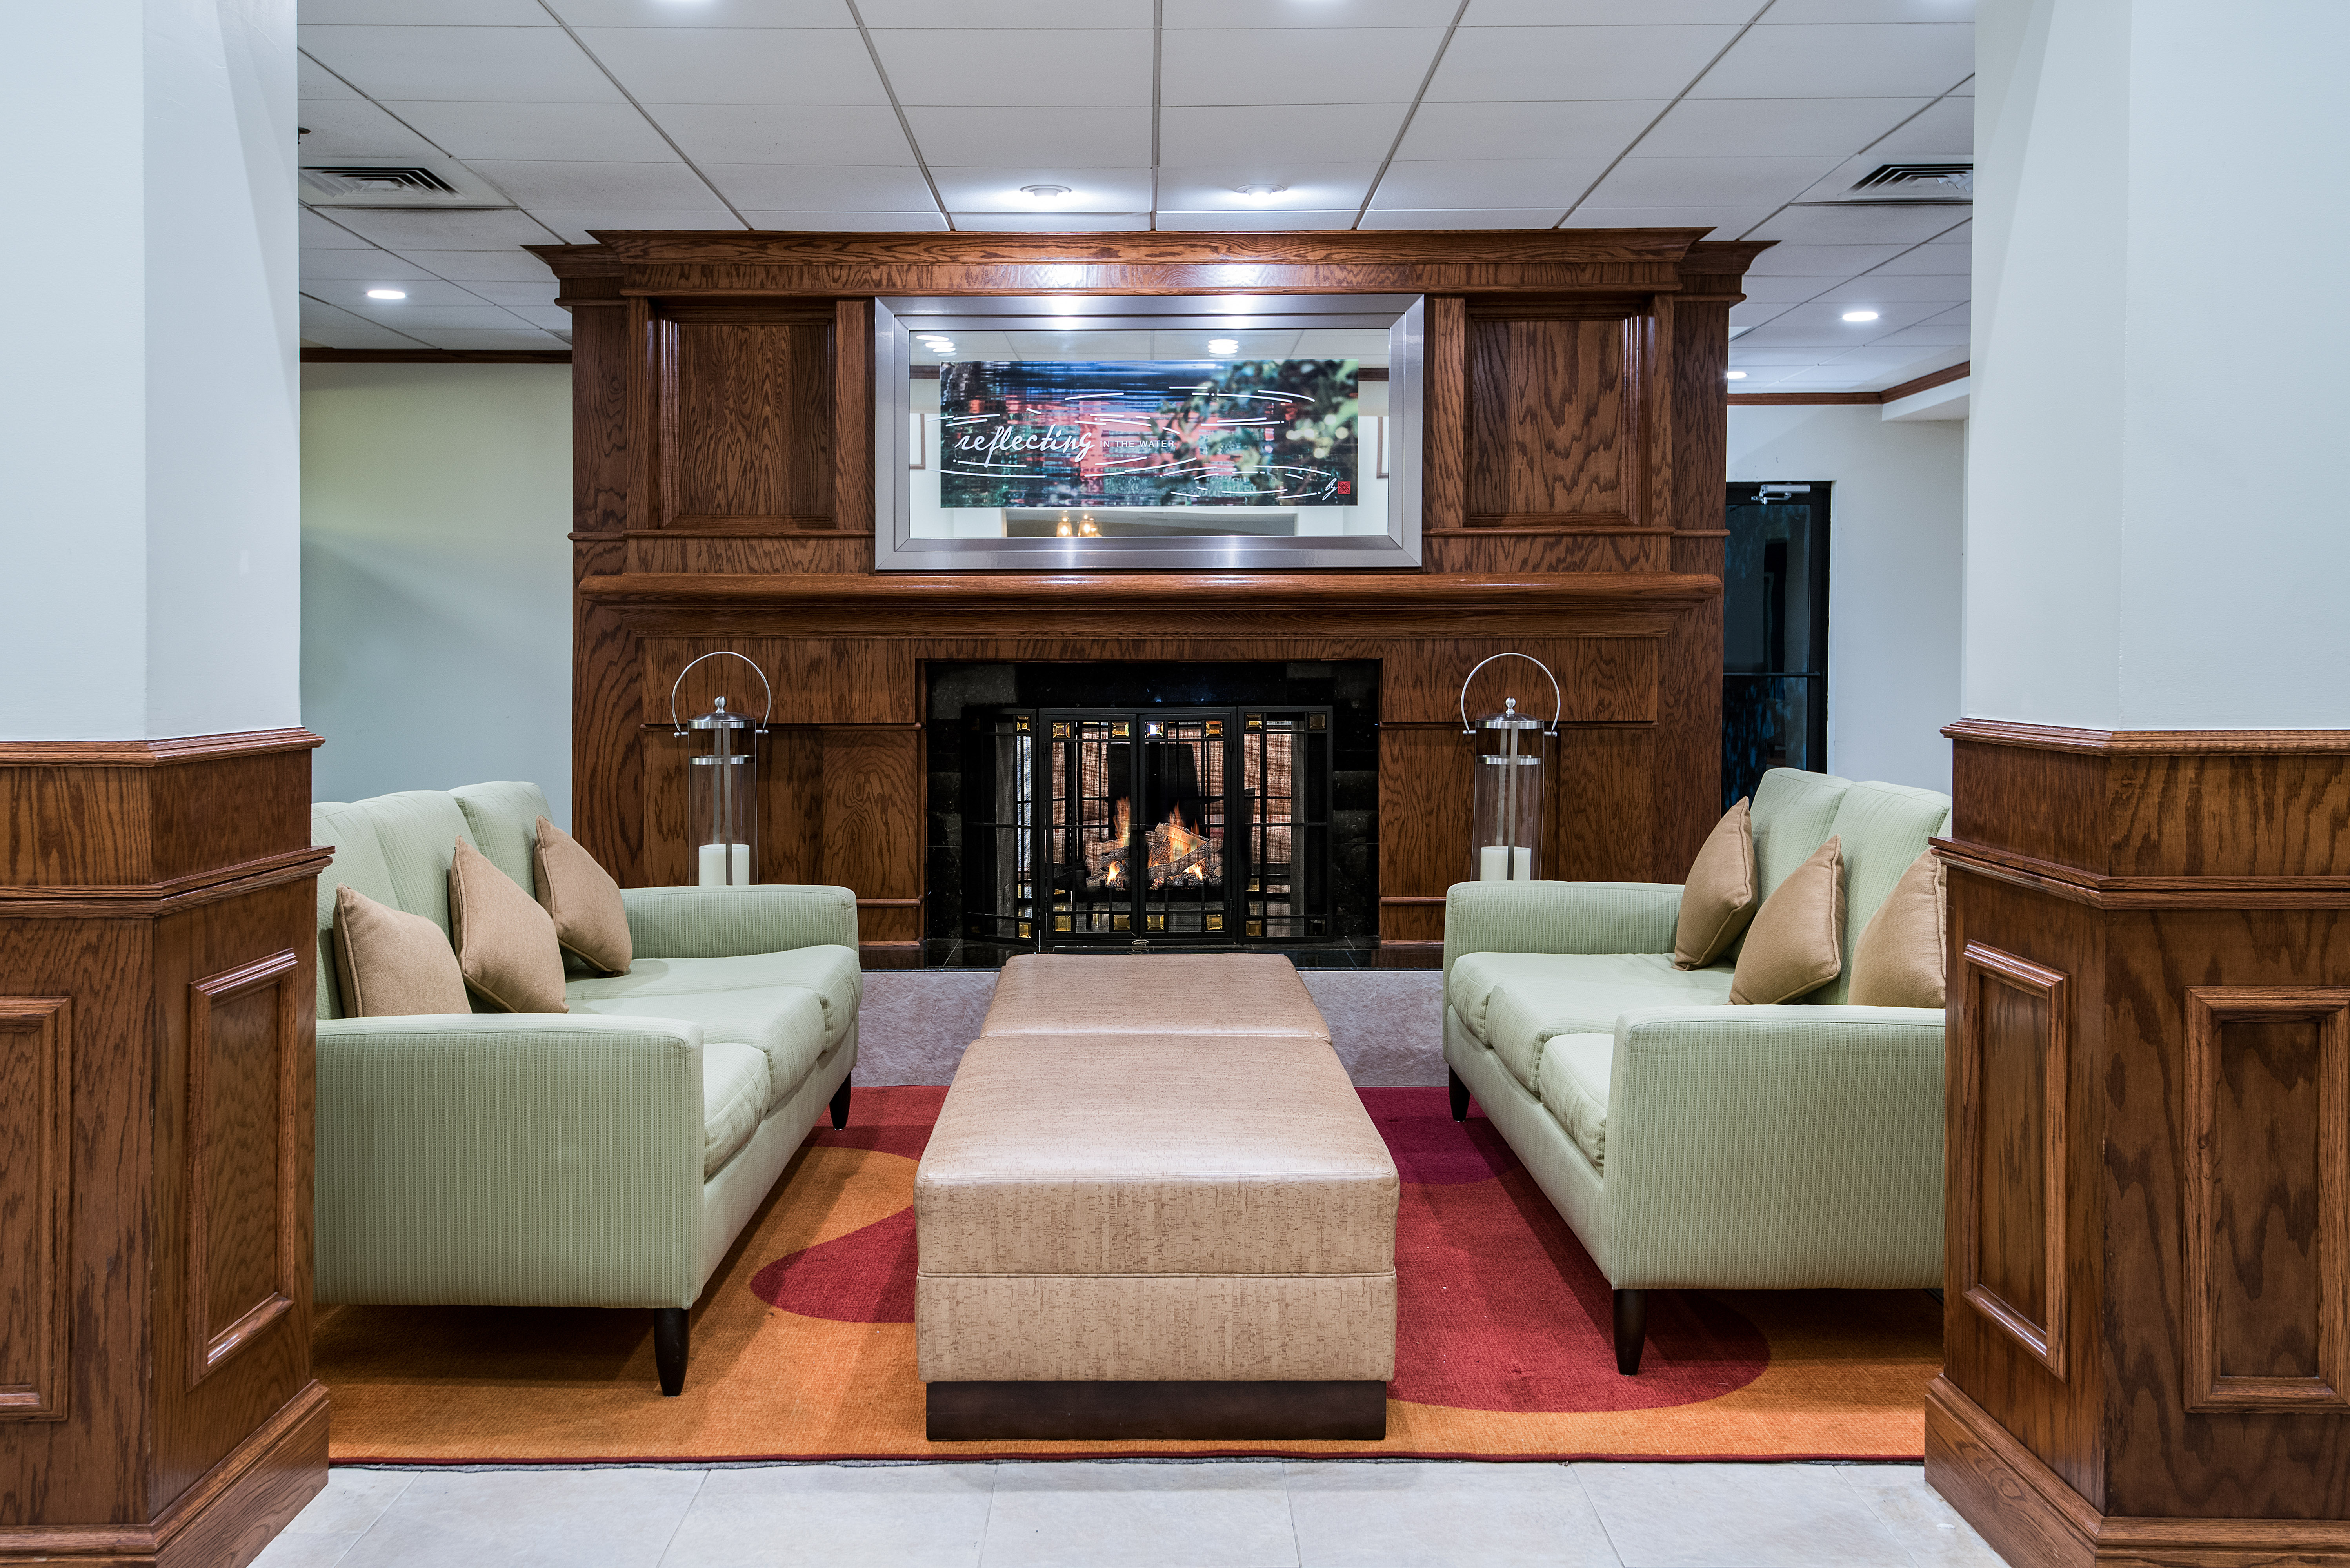 Lobby Seating Area with Fireplace and Couches